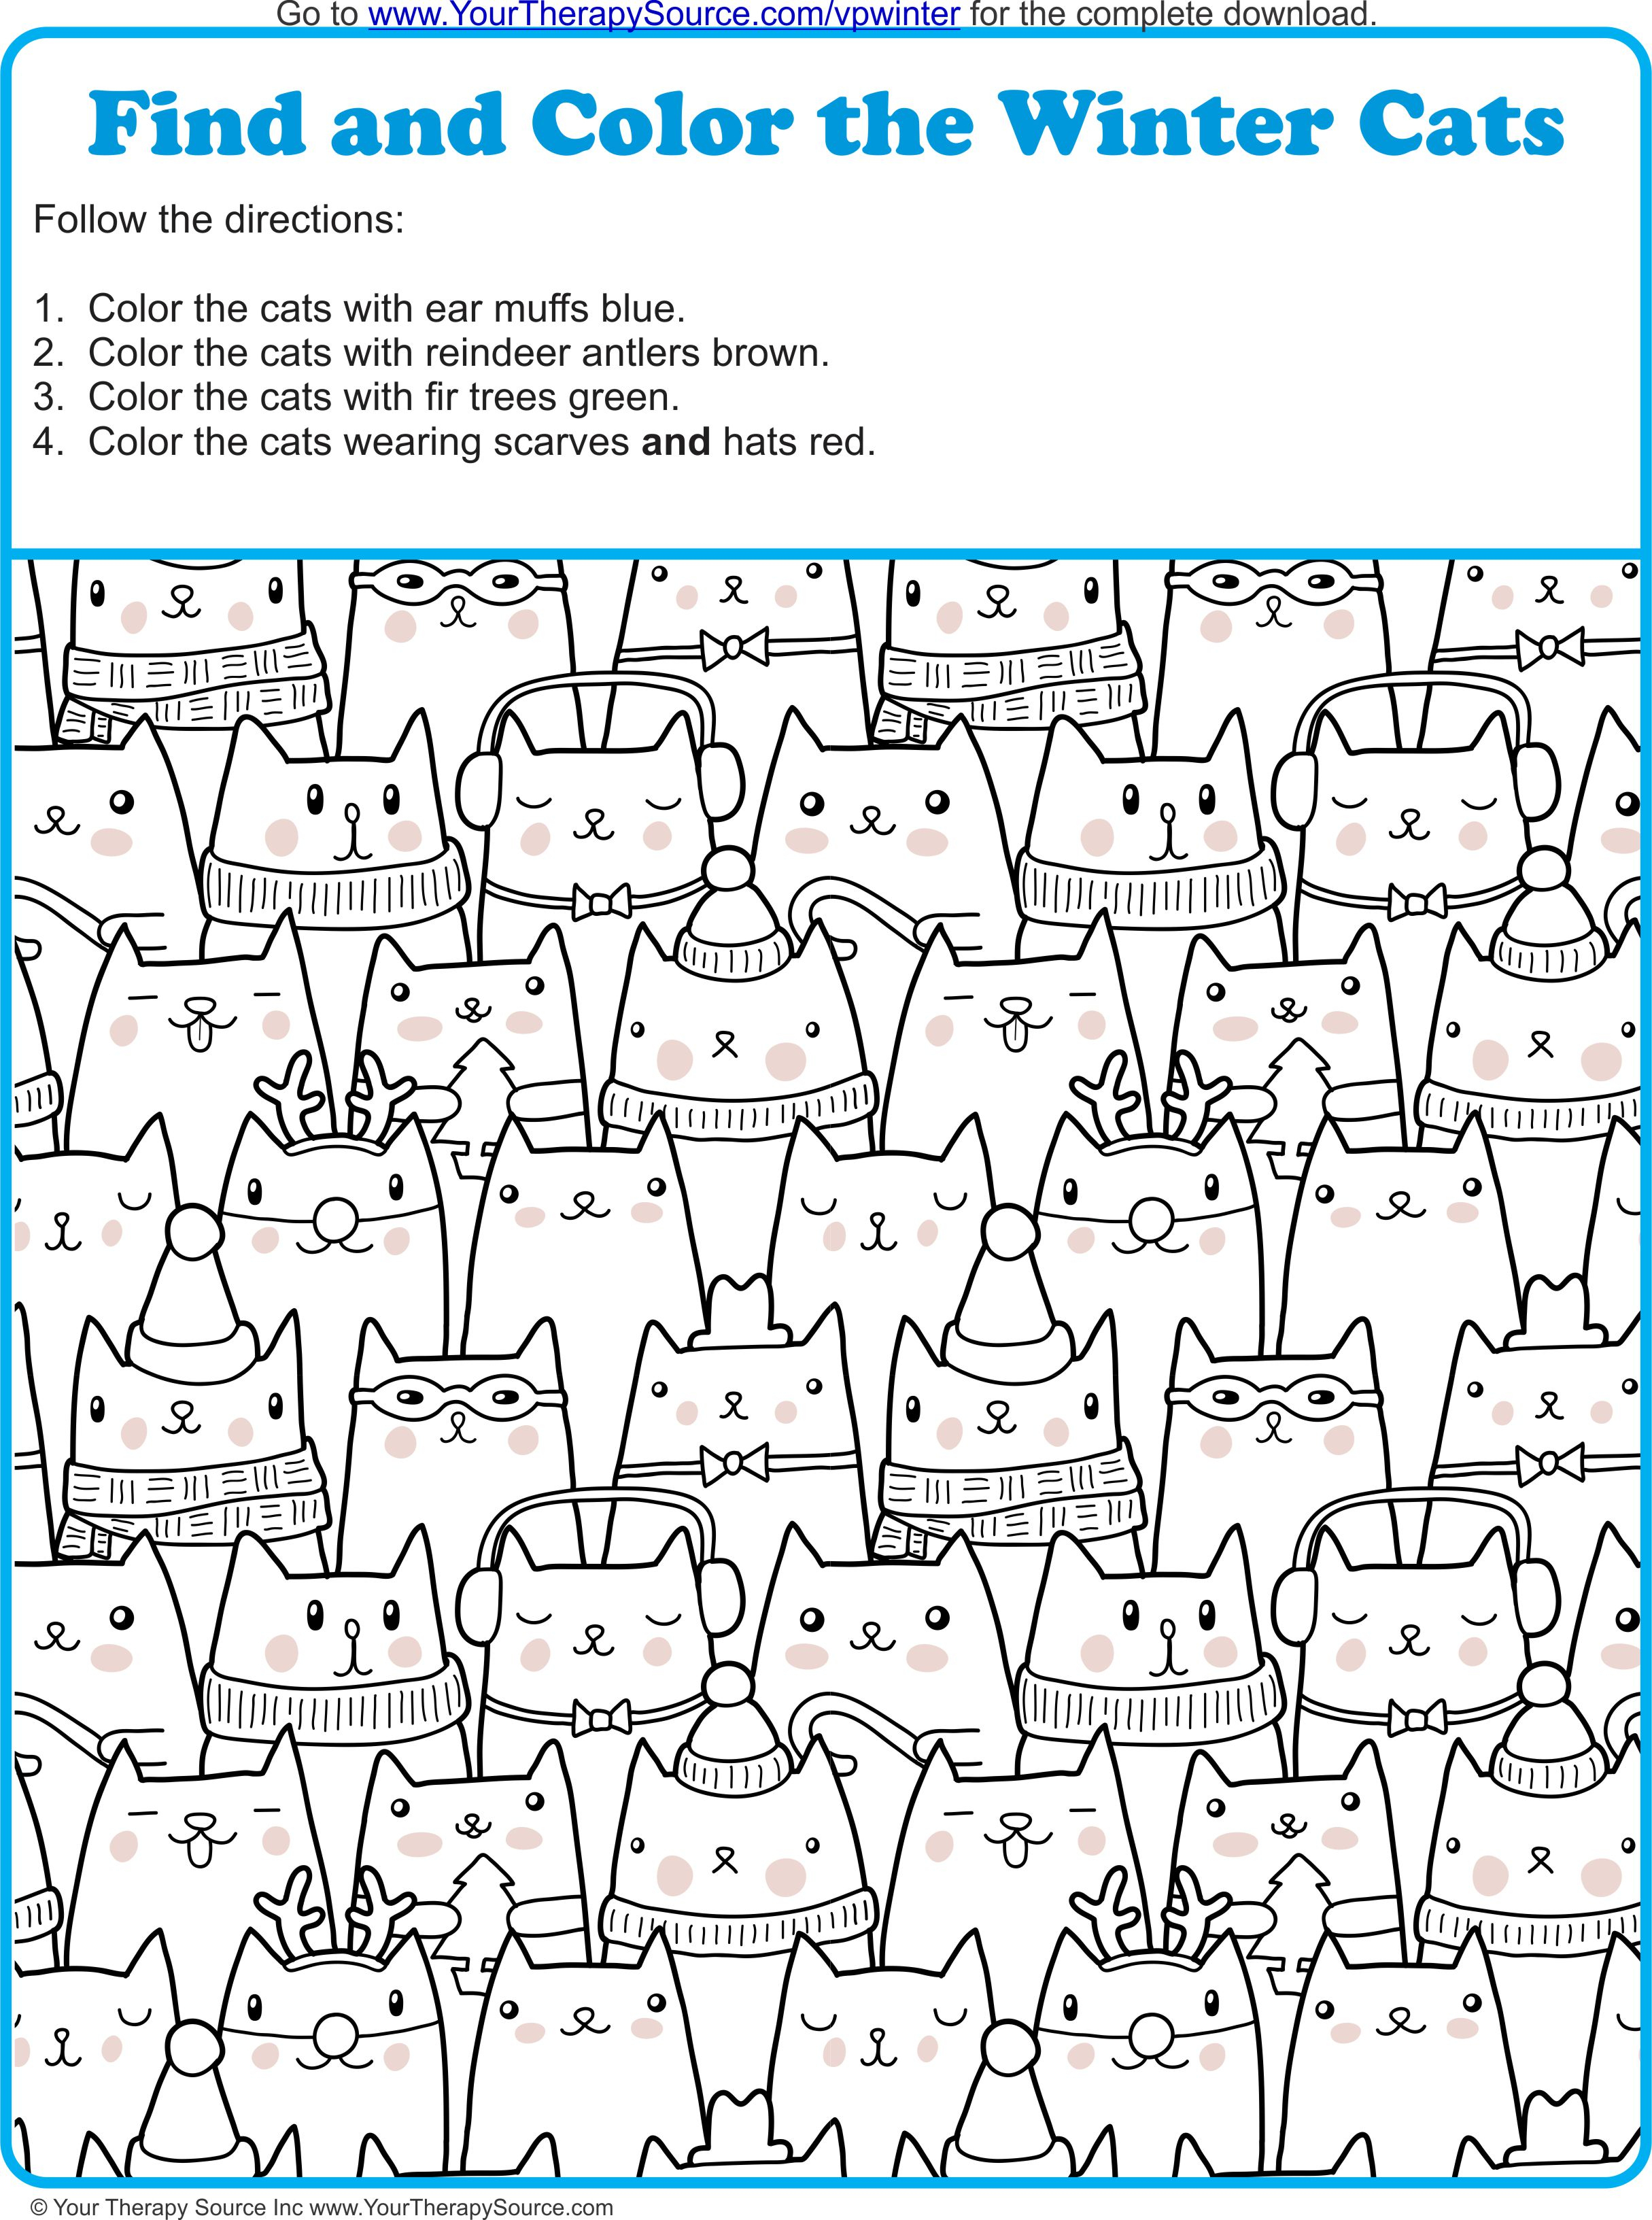 Find And Color The Winter Cats - Your Therapy Source - Free Printable Visual Puzzles